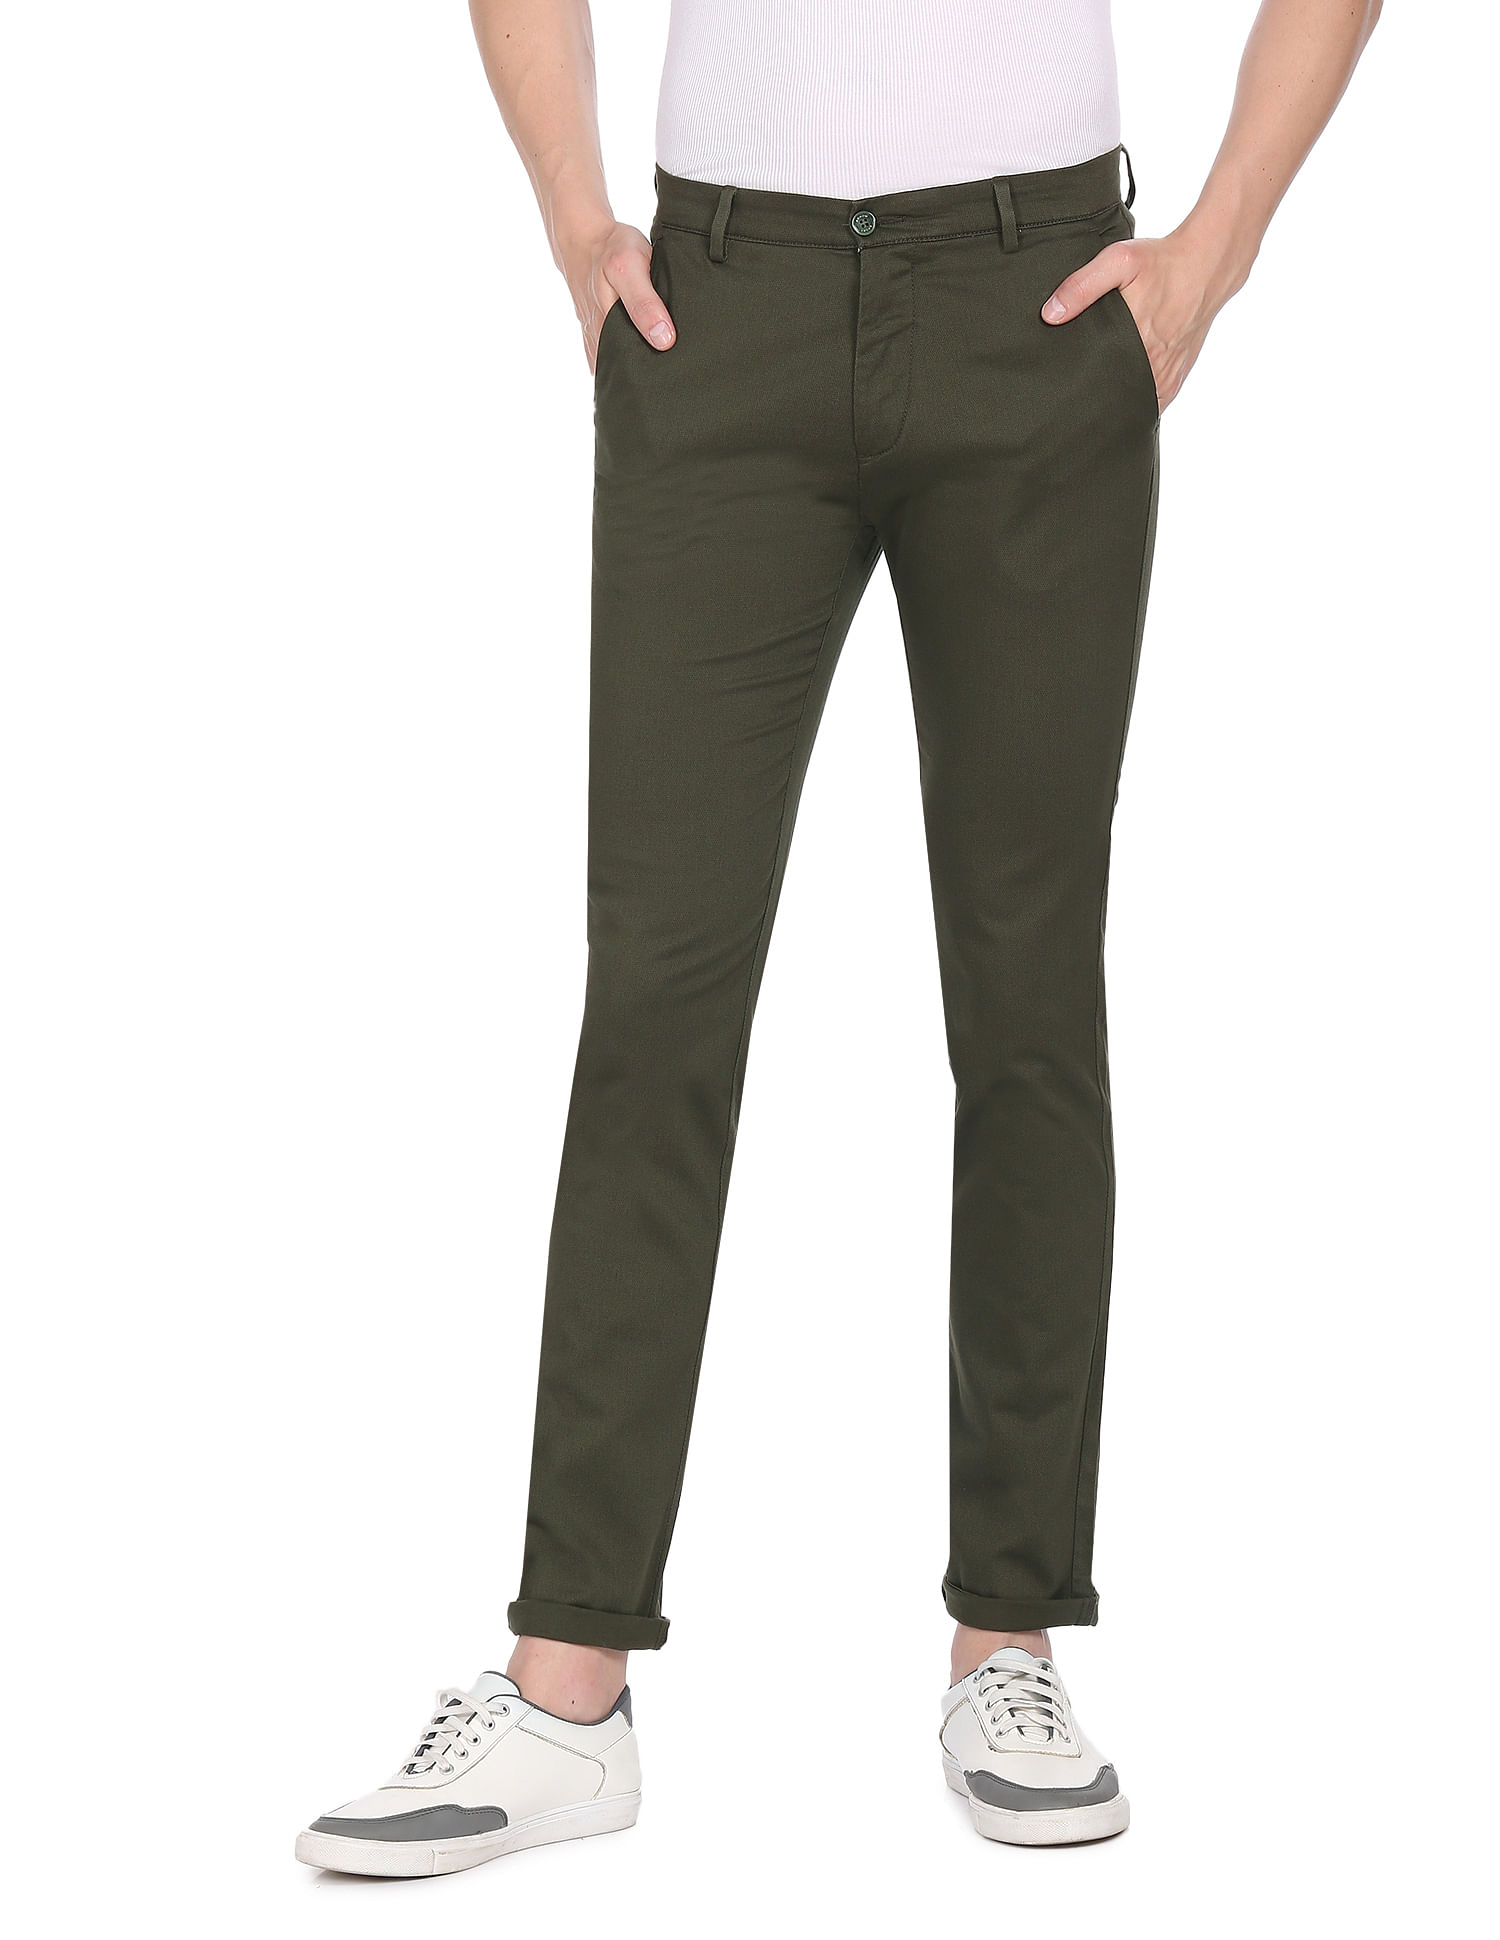 Buy Mint Trousers  Pants for Men by The Indian Garage Co Online  Ajiocom